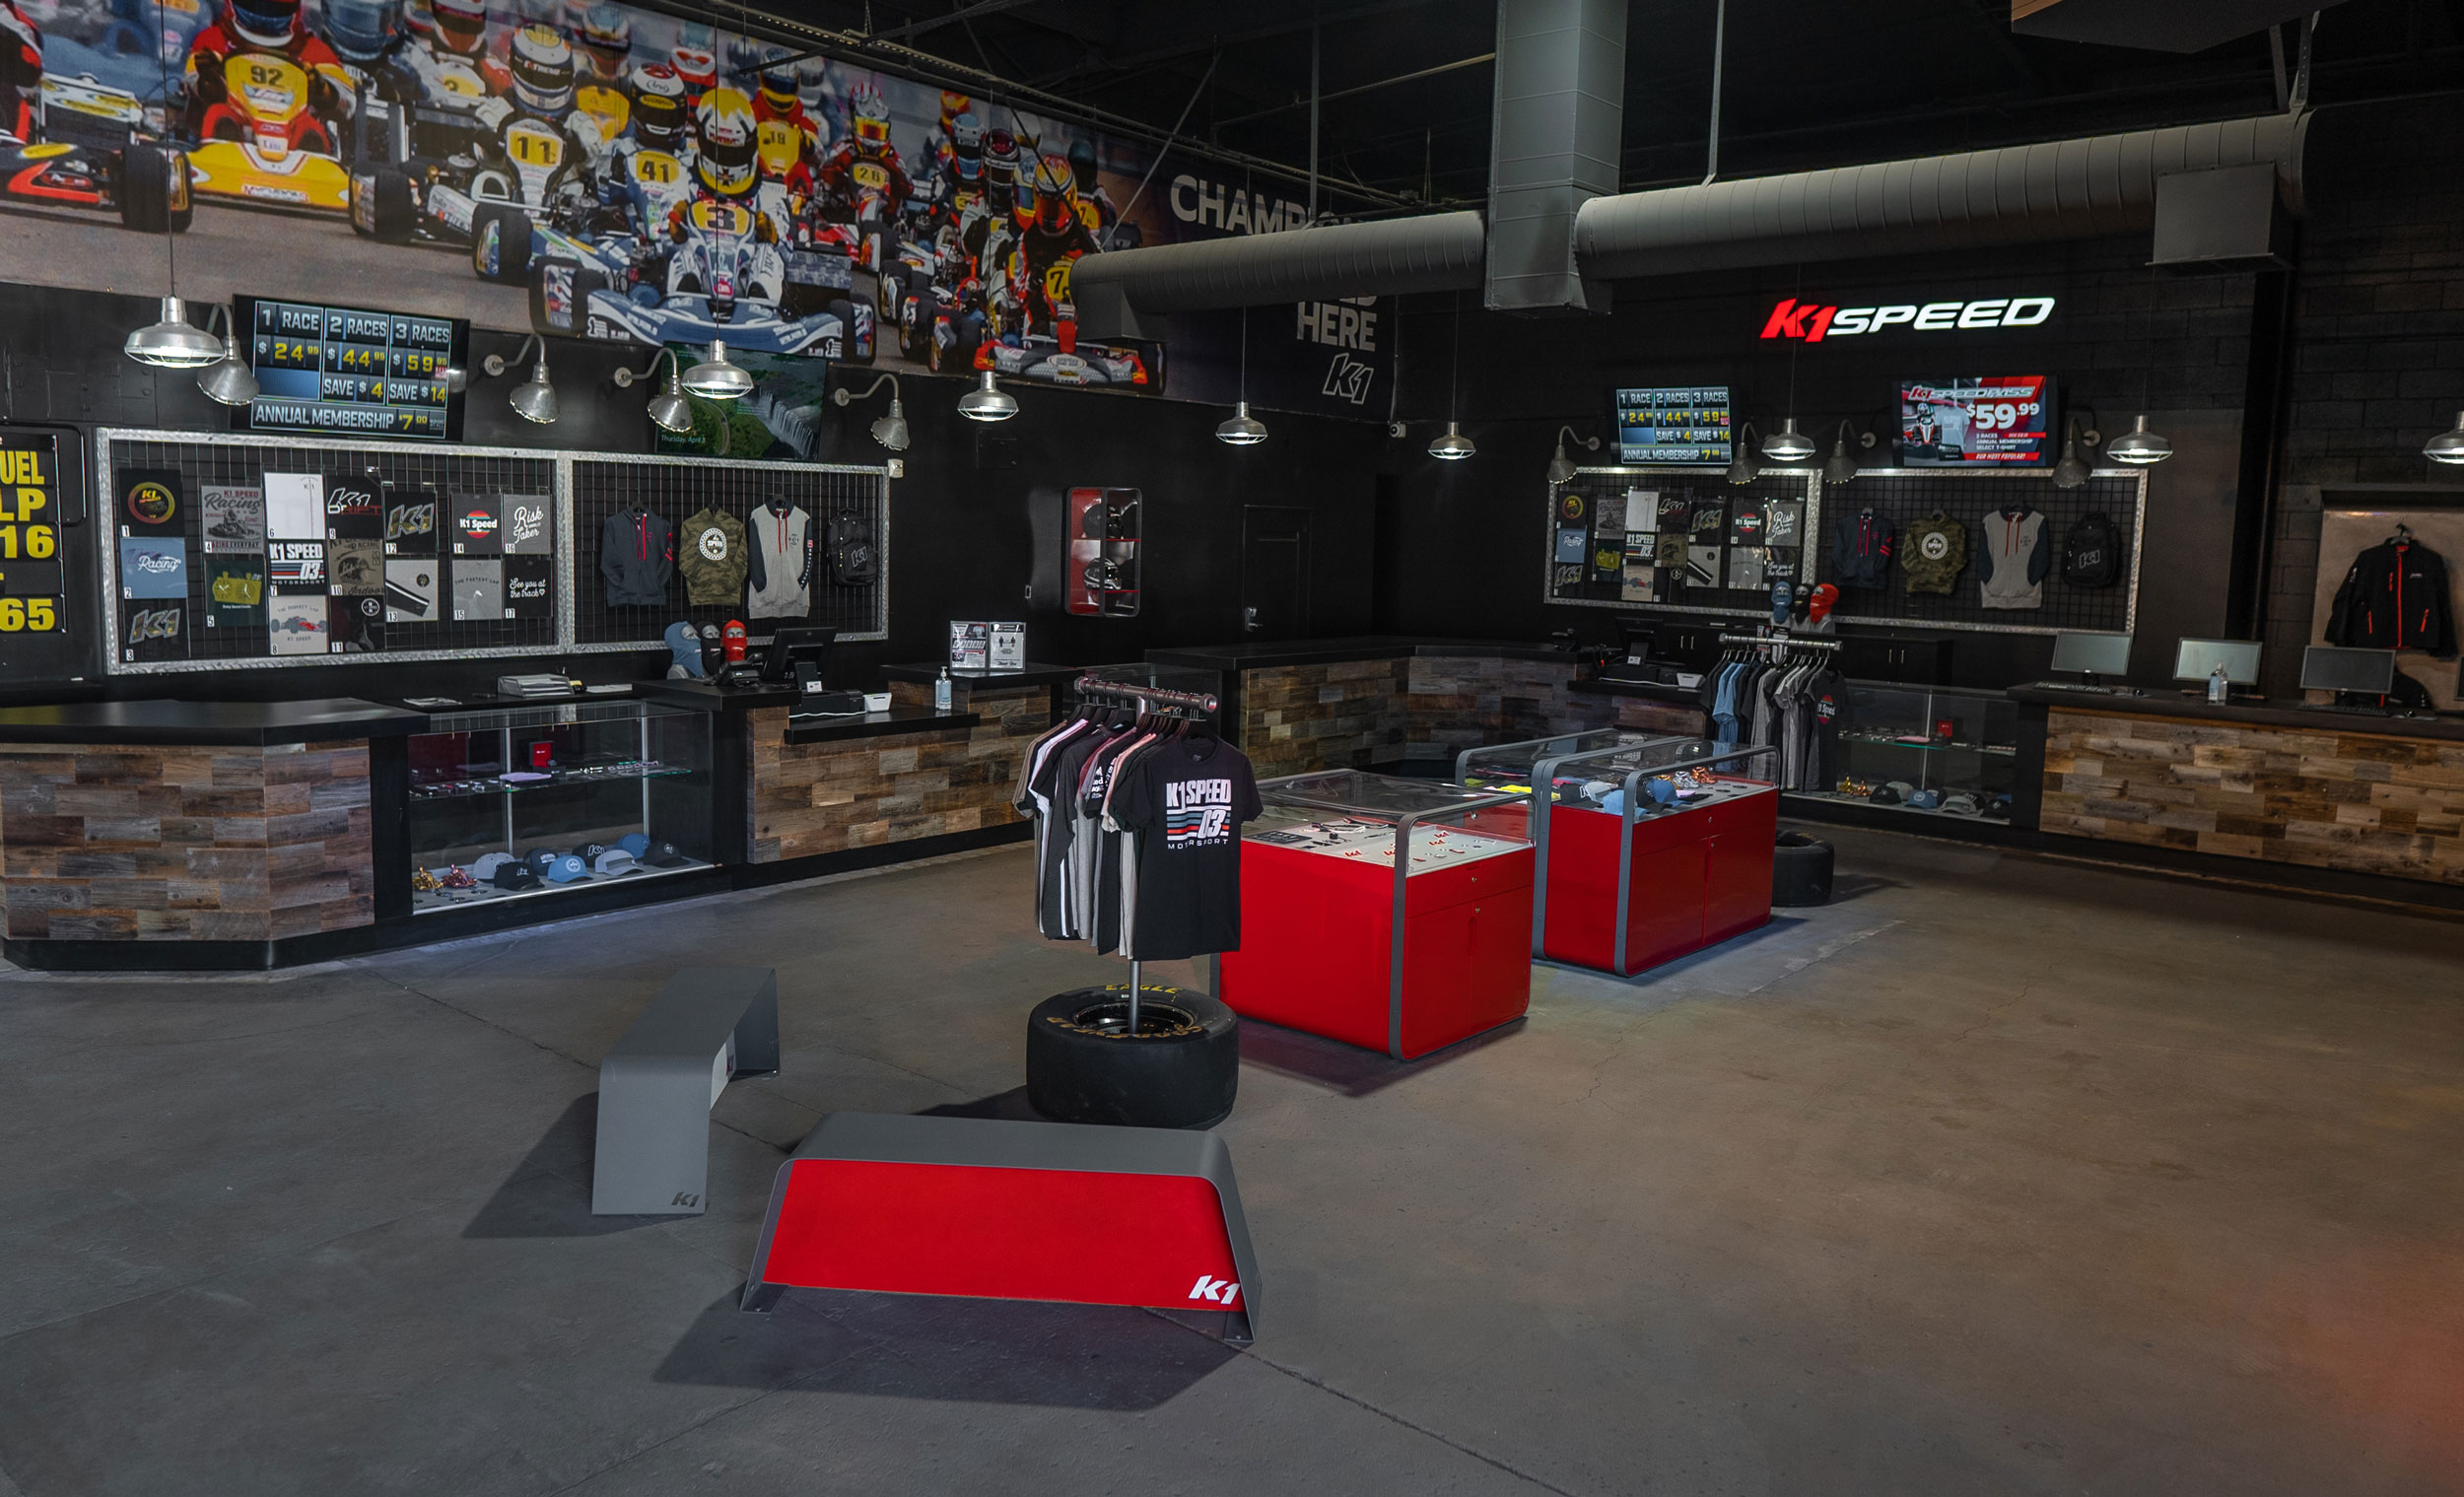 The Front Desk and Retail Store in the Lobby at K1 Speed Burbank where guests sign up and register for racing